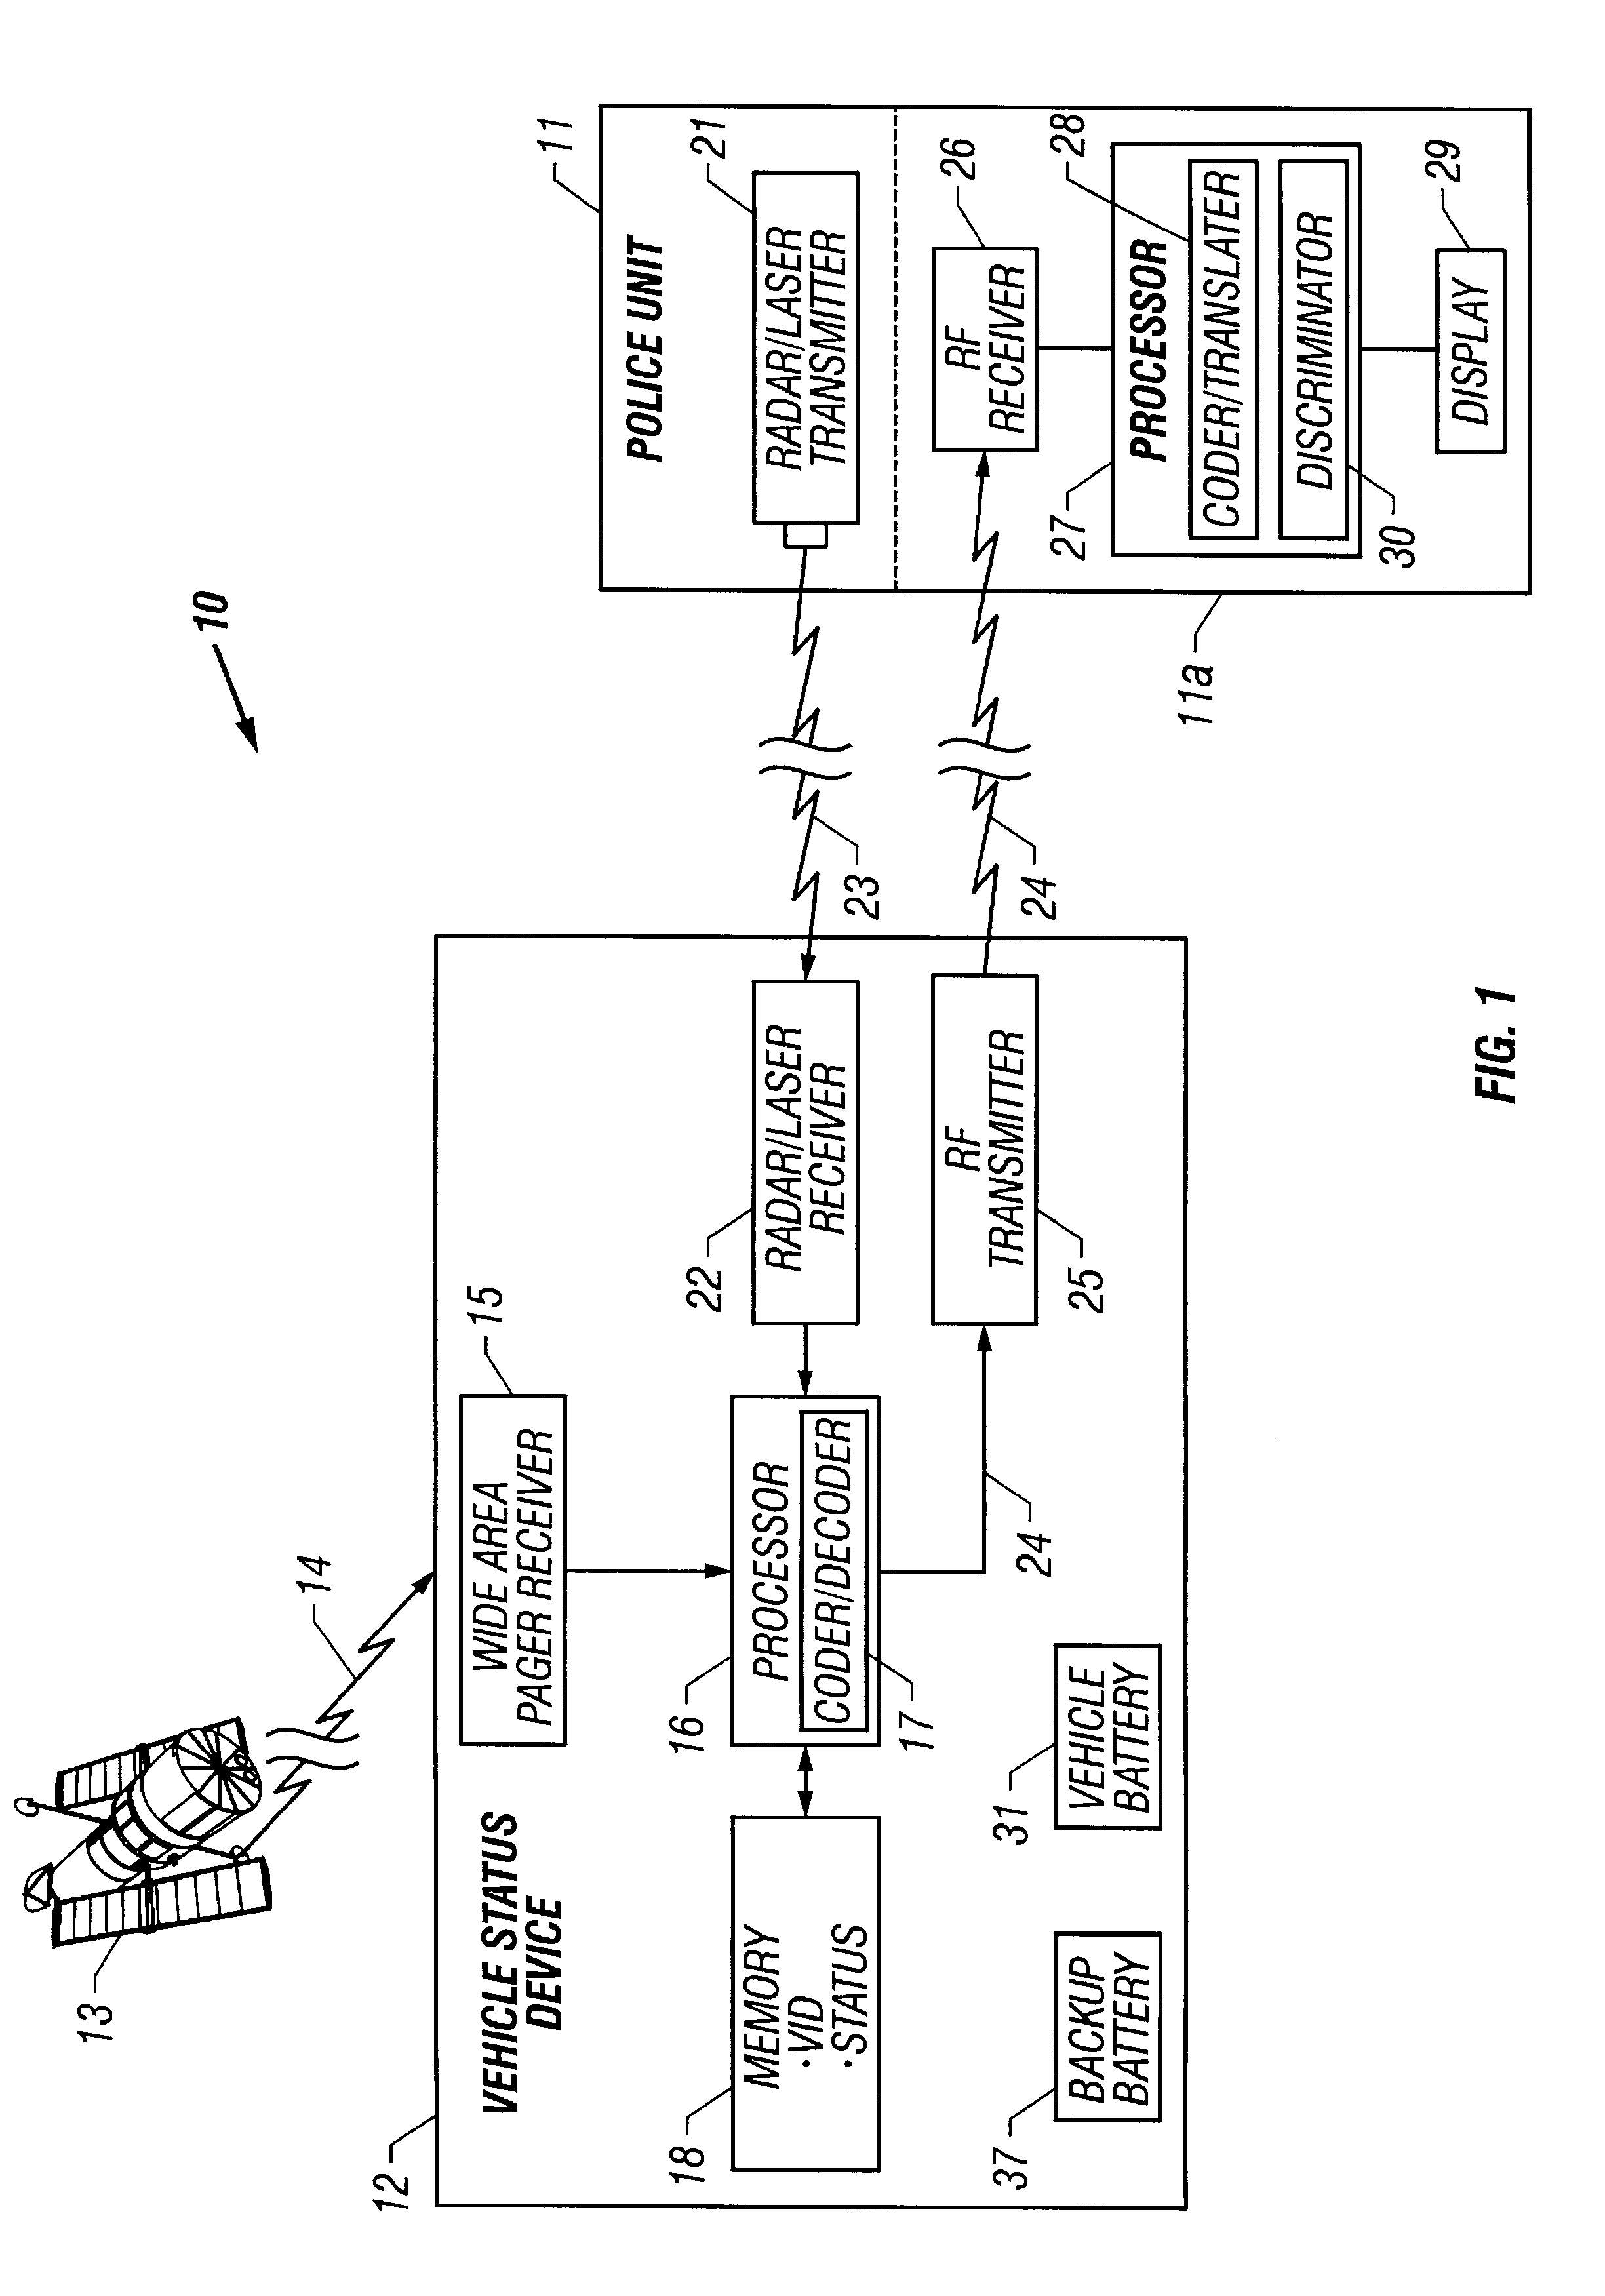 Apparatus and system for remotely updating and monitoring the status of a vehicle